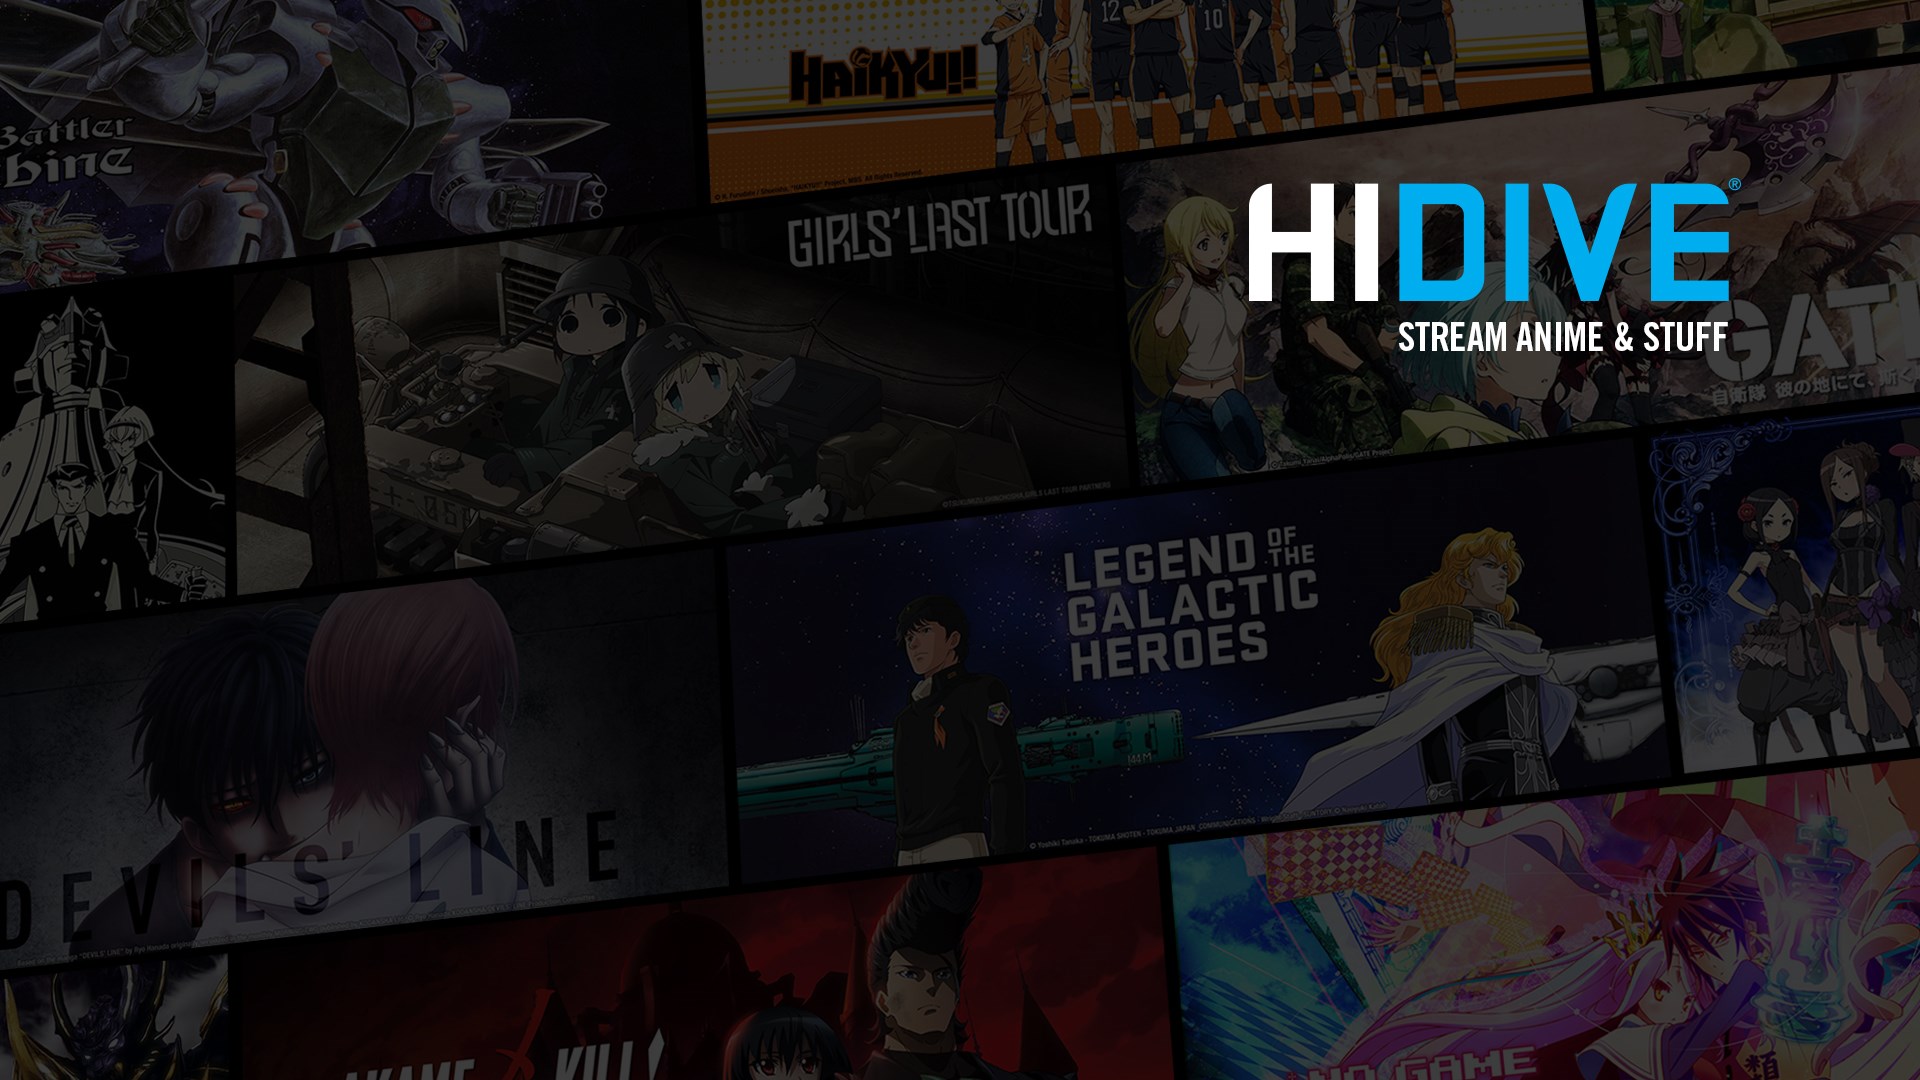 How to Watch Hidive Anime with Online amp Offline Options